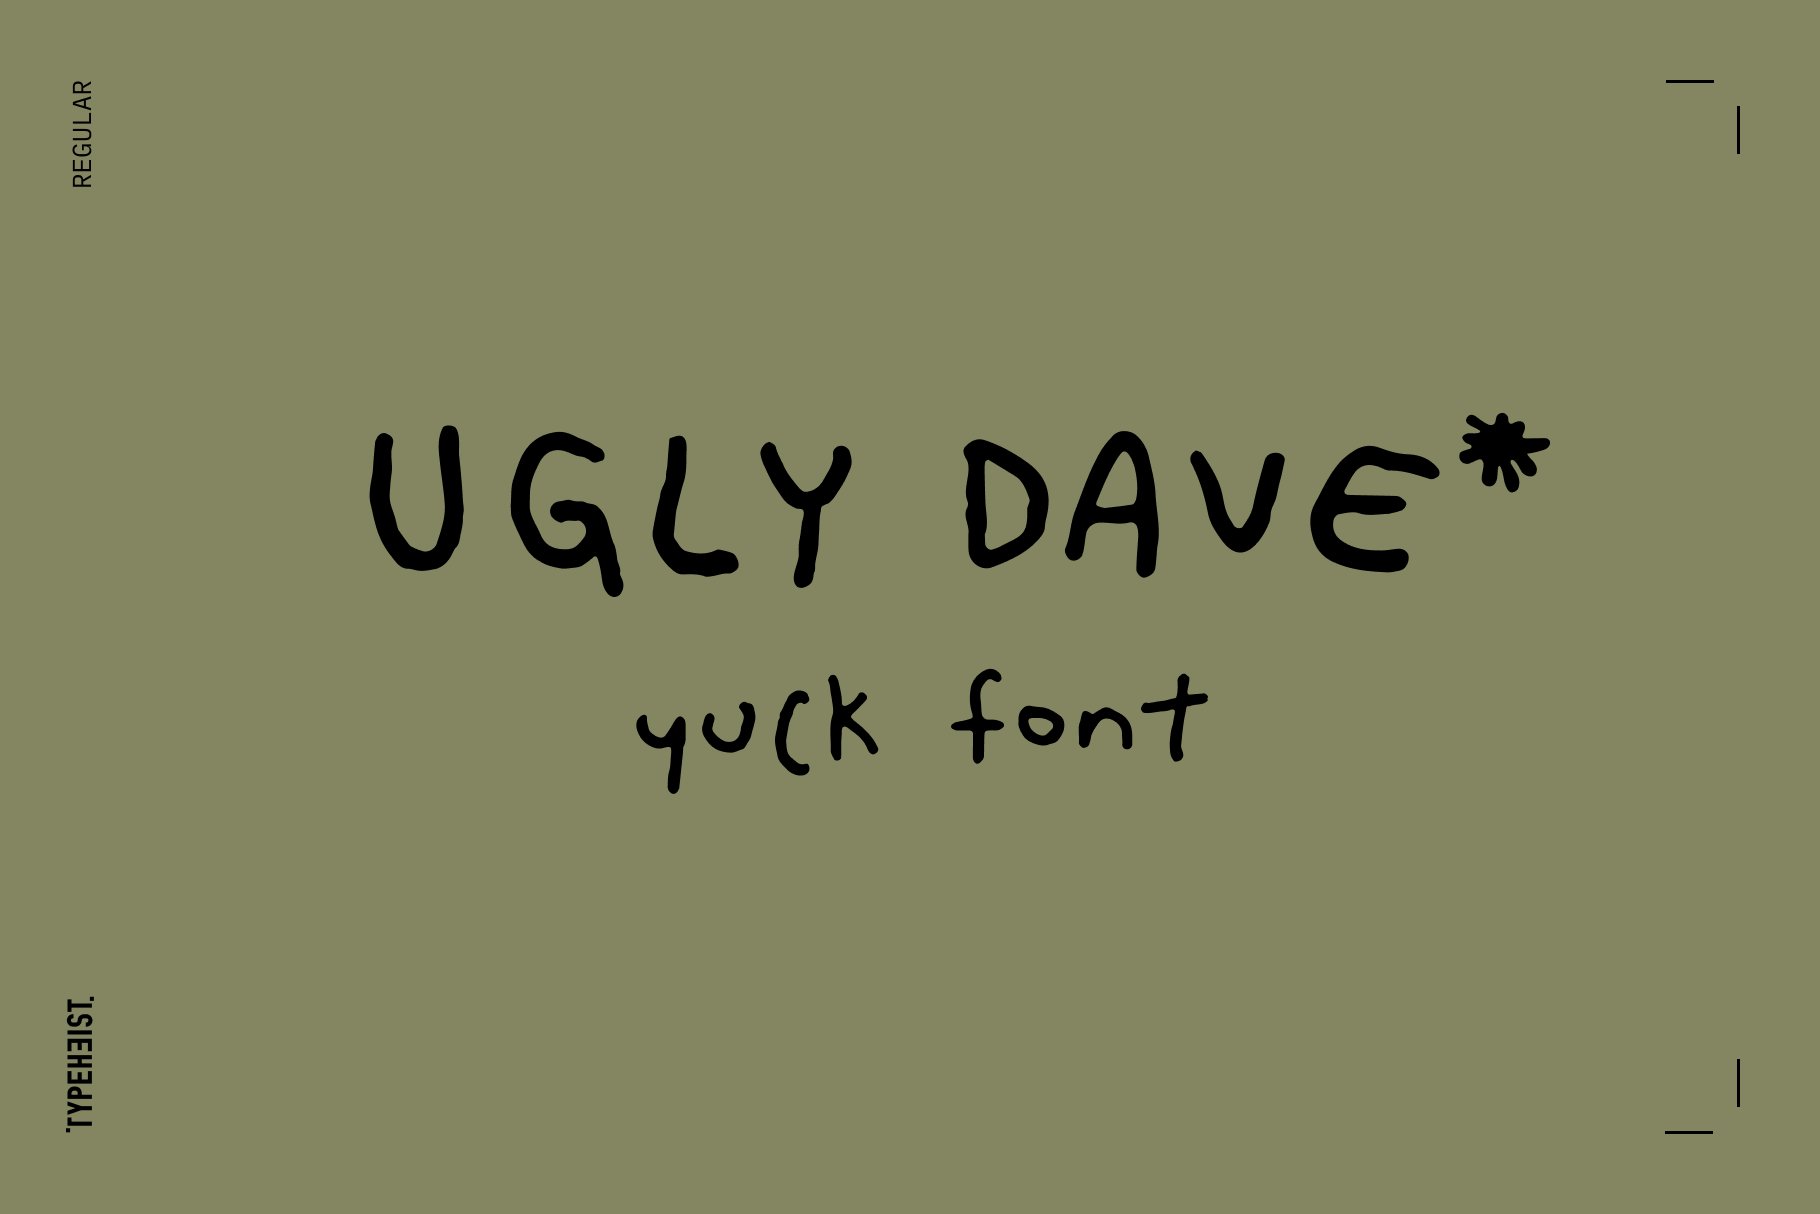 Ugly Dave Bad Handwriting Font cover image.